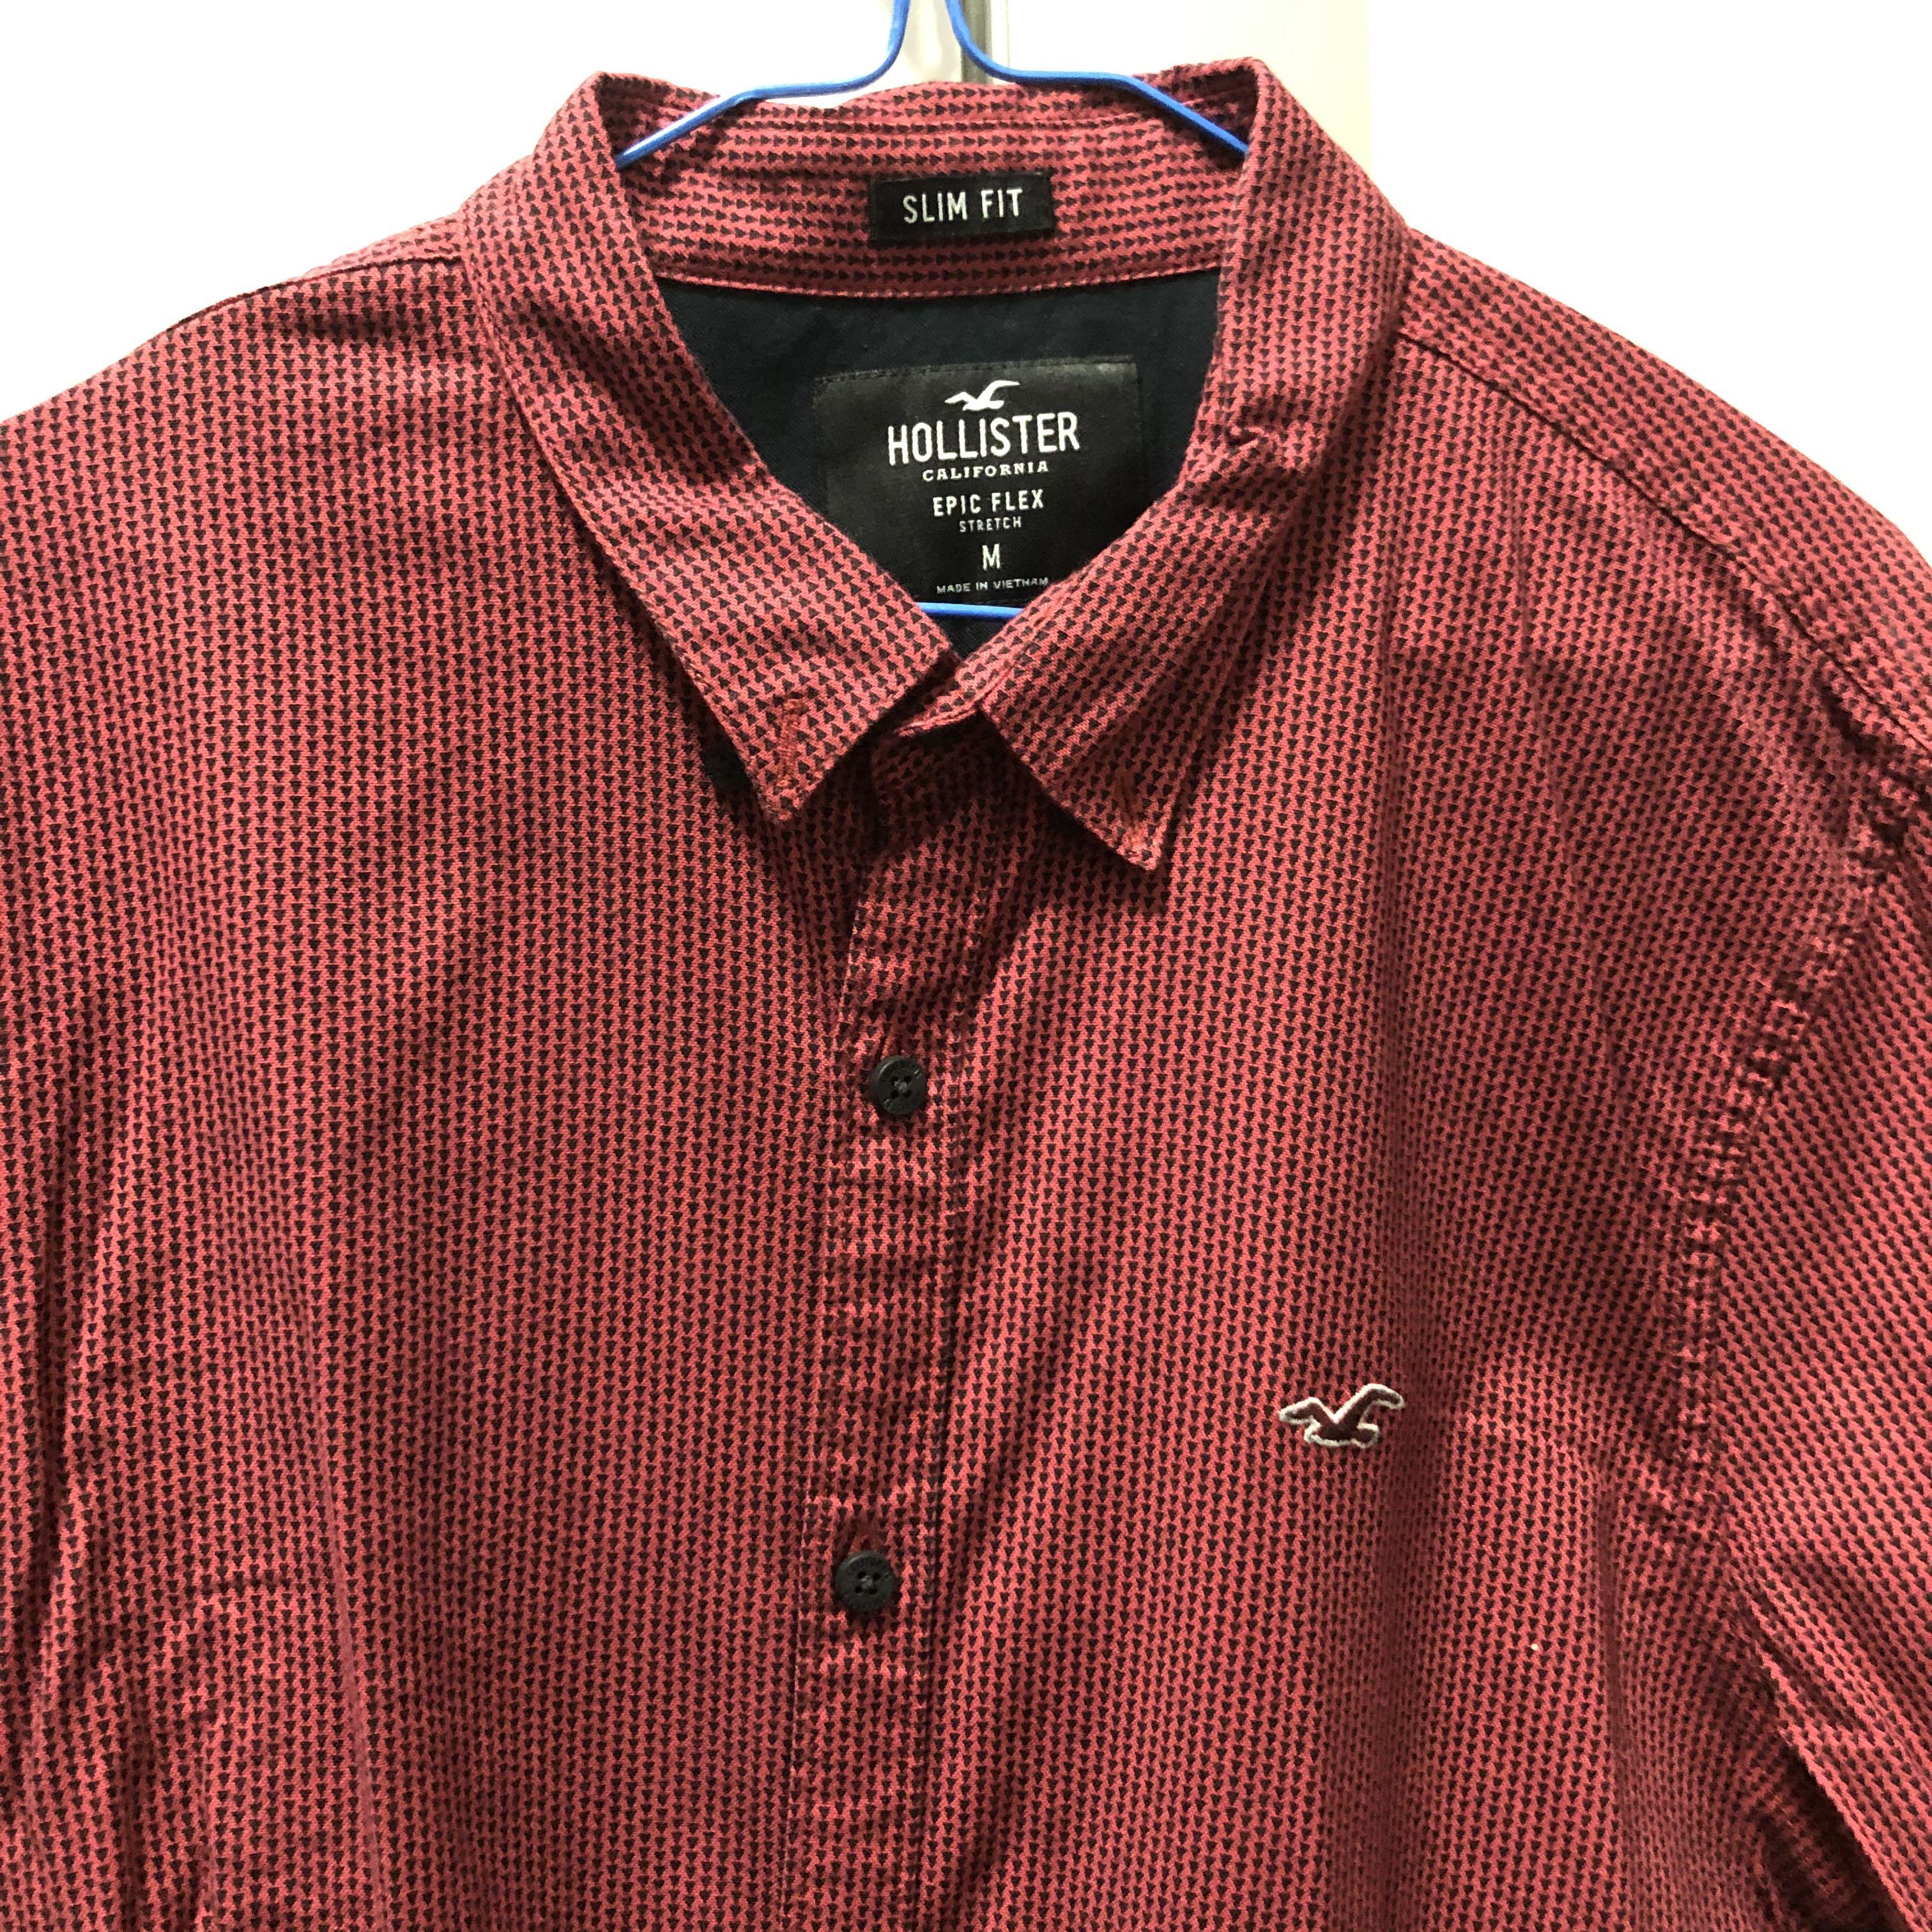 Hollister Red Button-down Shirt, Men's Fashion, Tops & Sets